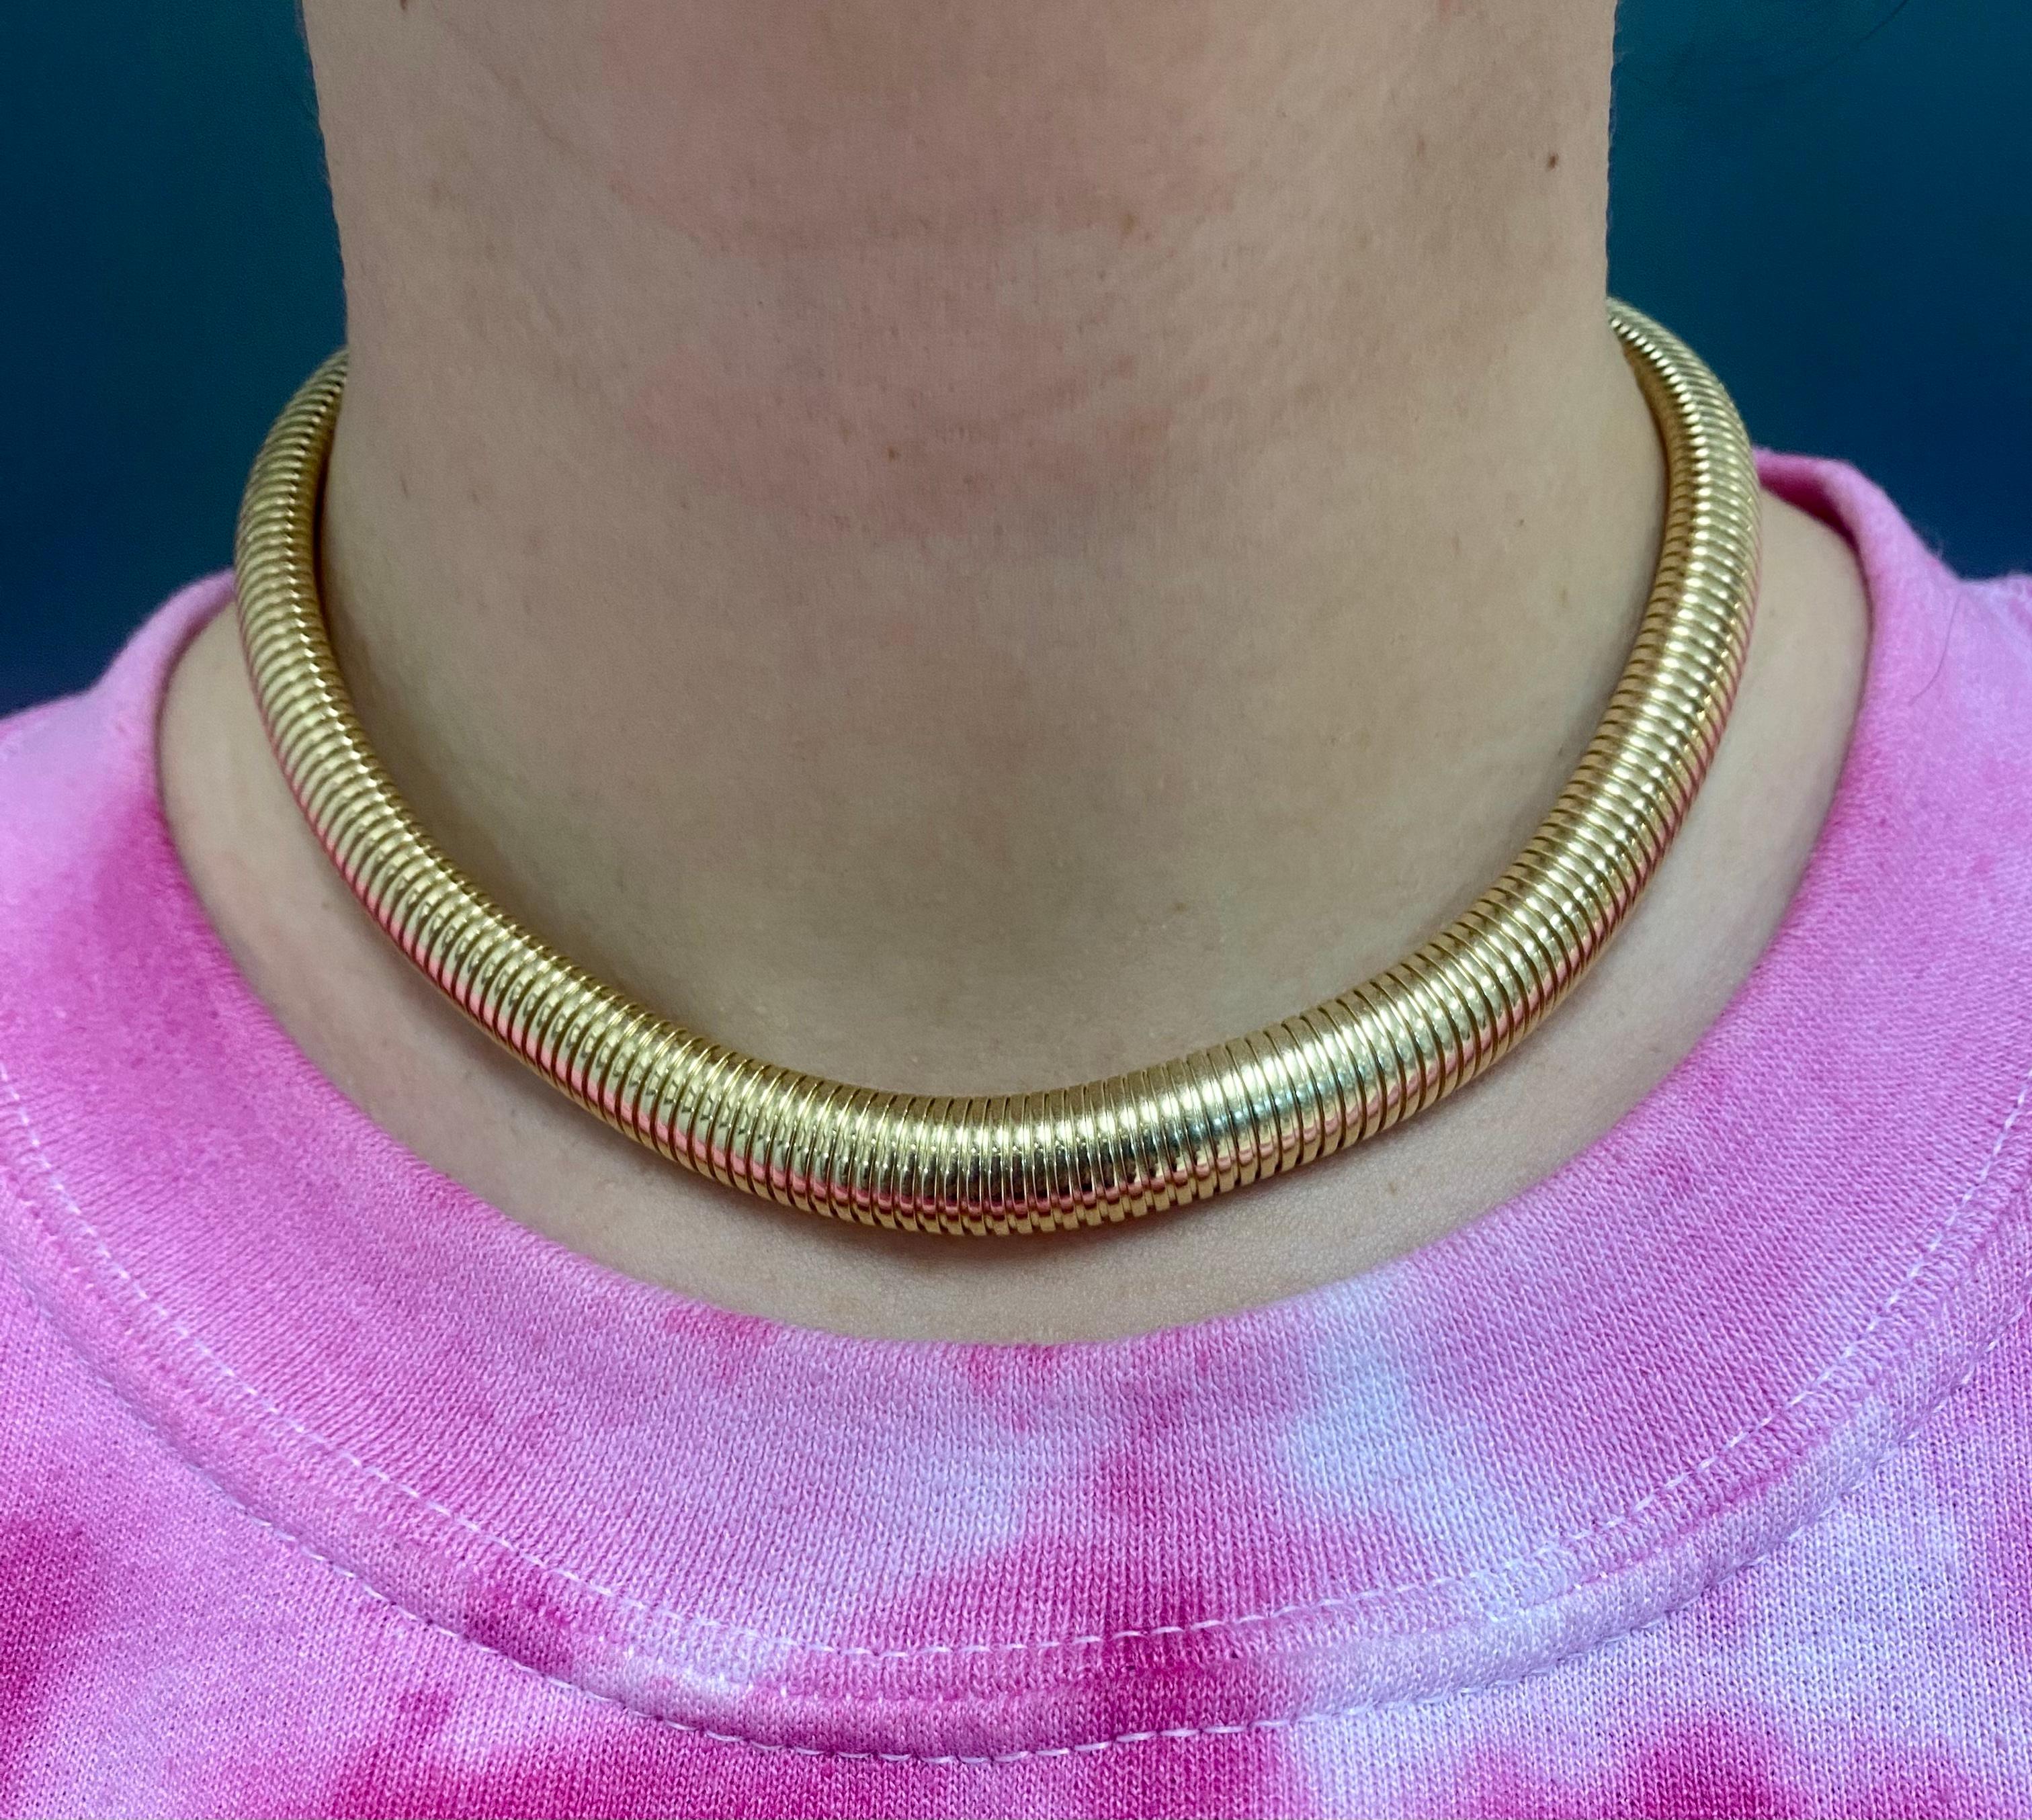 Designer: Amoro Yaffa
Materials: 14 karat yellow gold
Weight: 35.7 grams
Measurement: 15 inches long and 3/8 inches wide
Hallmarks: Amoro Yaffa 14Kt Italy

A gorgeous Amoro Yaffa tubogas choker necklace made of 14k gold. 	The necklace is signed by